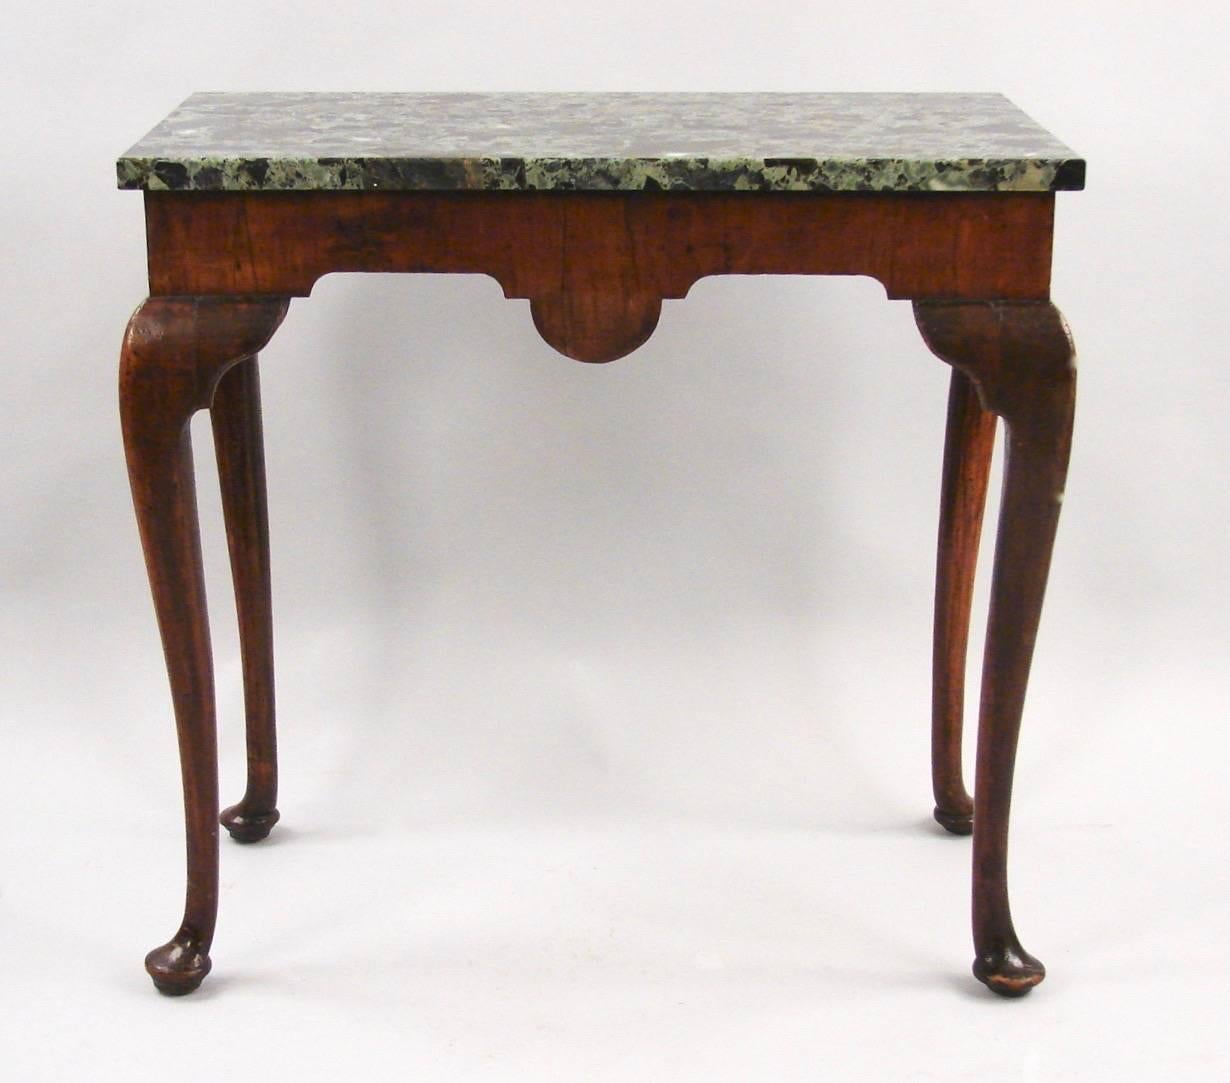 A pretty George II period Irish walnut side table, the replaced green marble top above a carved shell supported on cabriole legs with carved knees ending in pad feet. Excellent old color and patina. Reverse is finished so the piece may be used as a